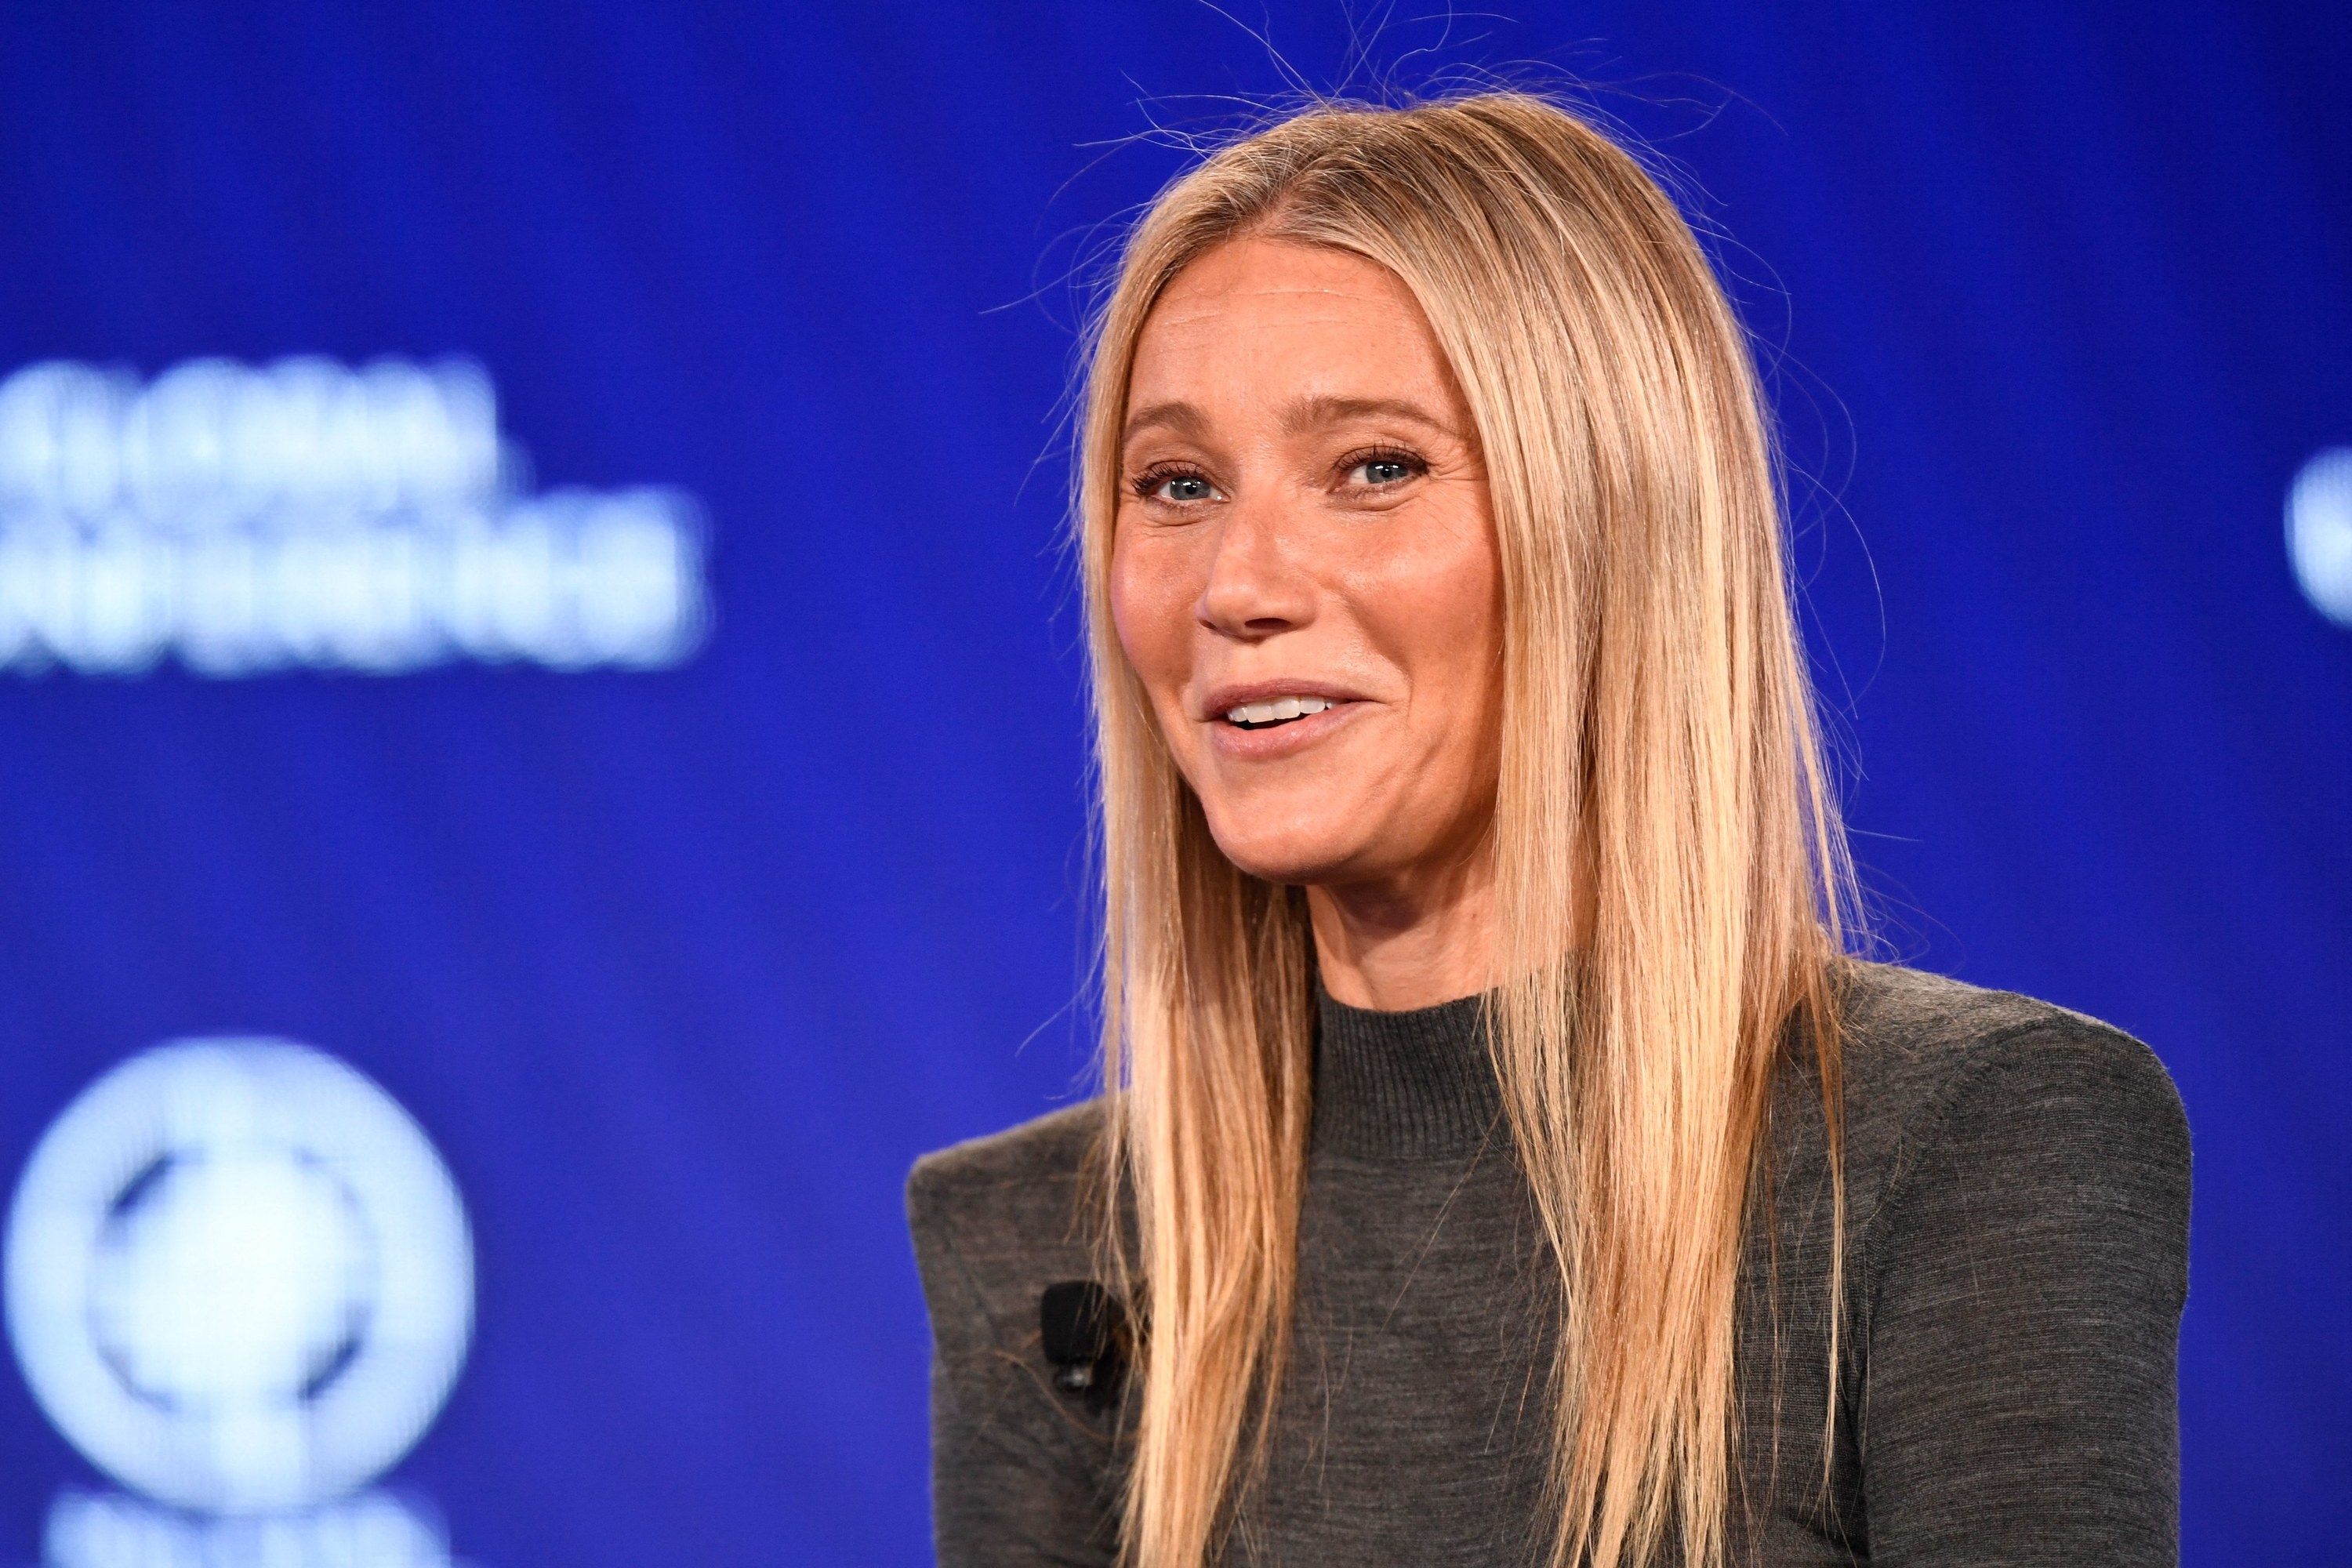 Gwyneth Paltrow laughing as she talks at an event